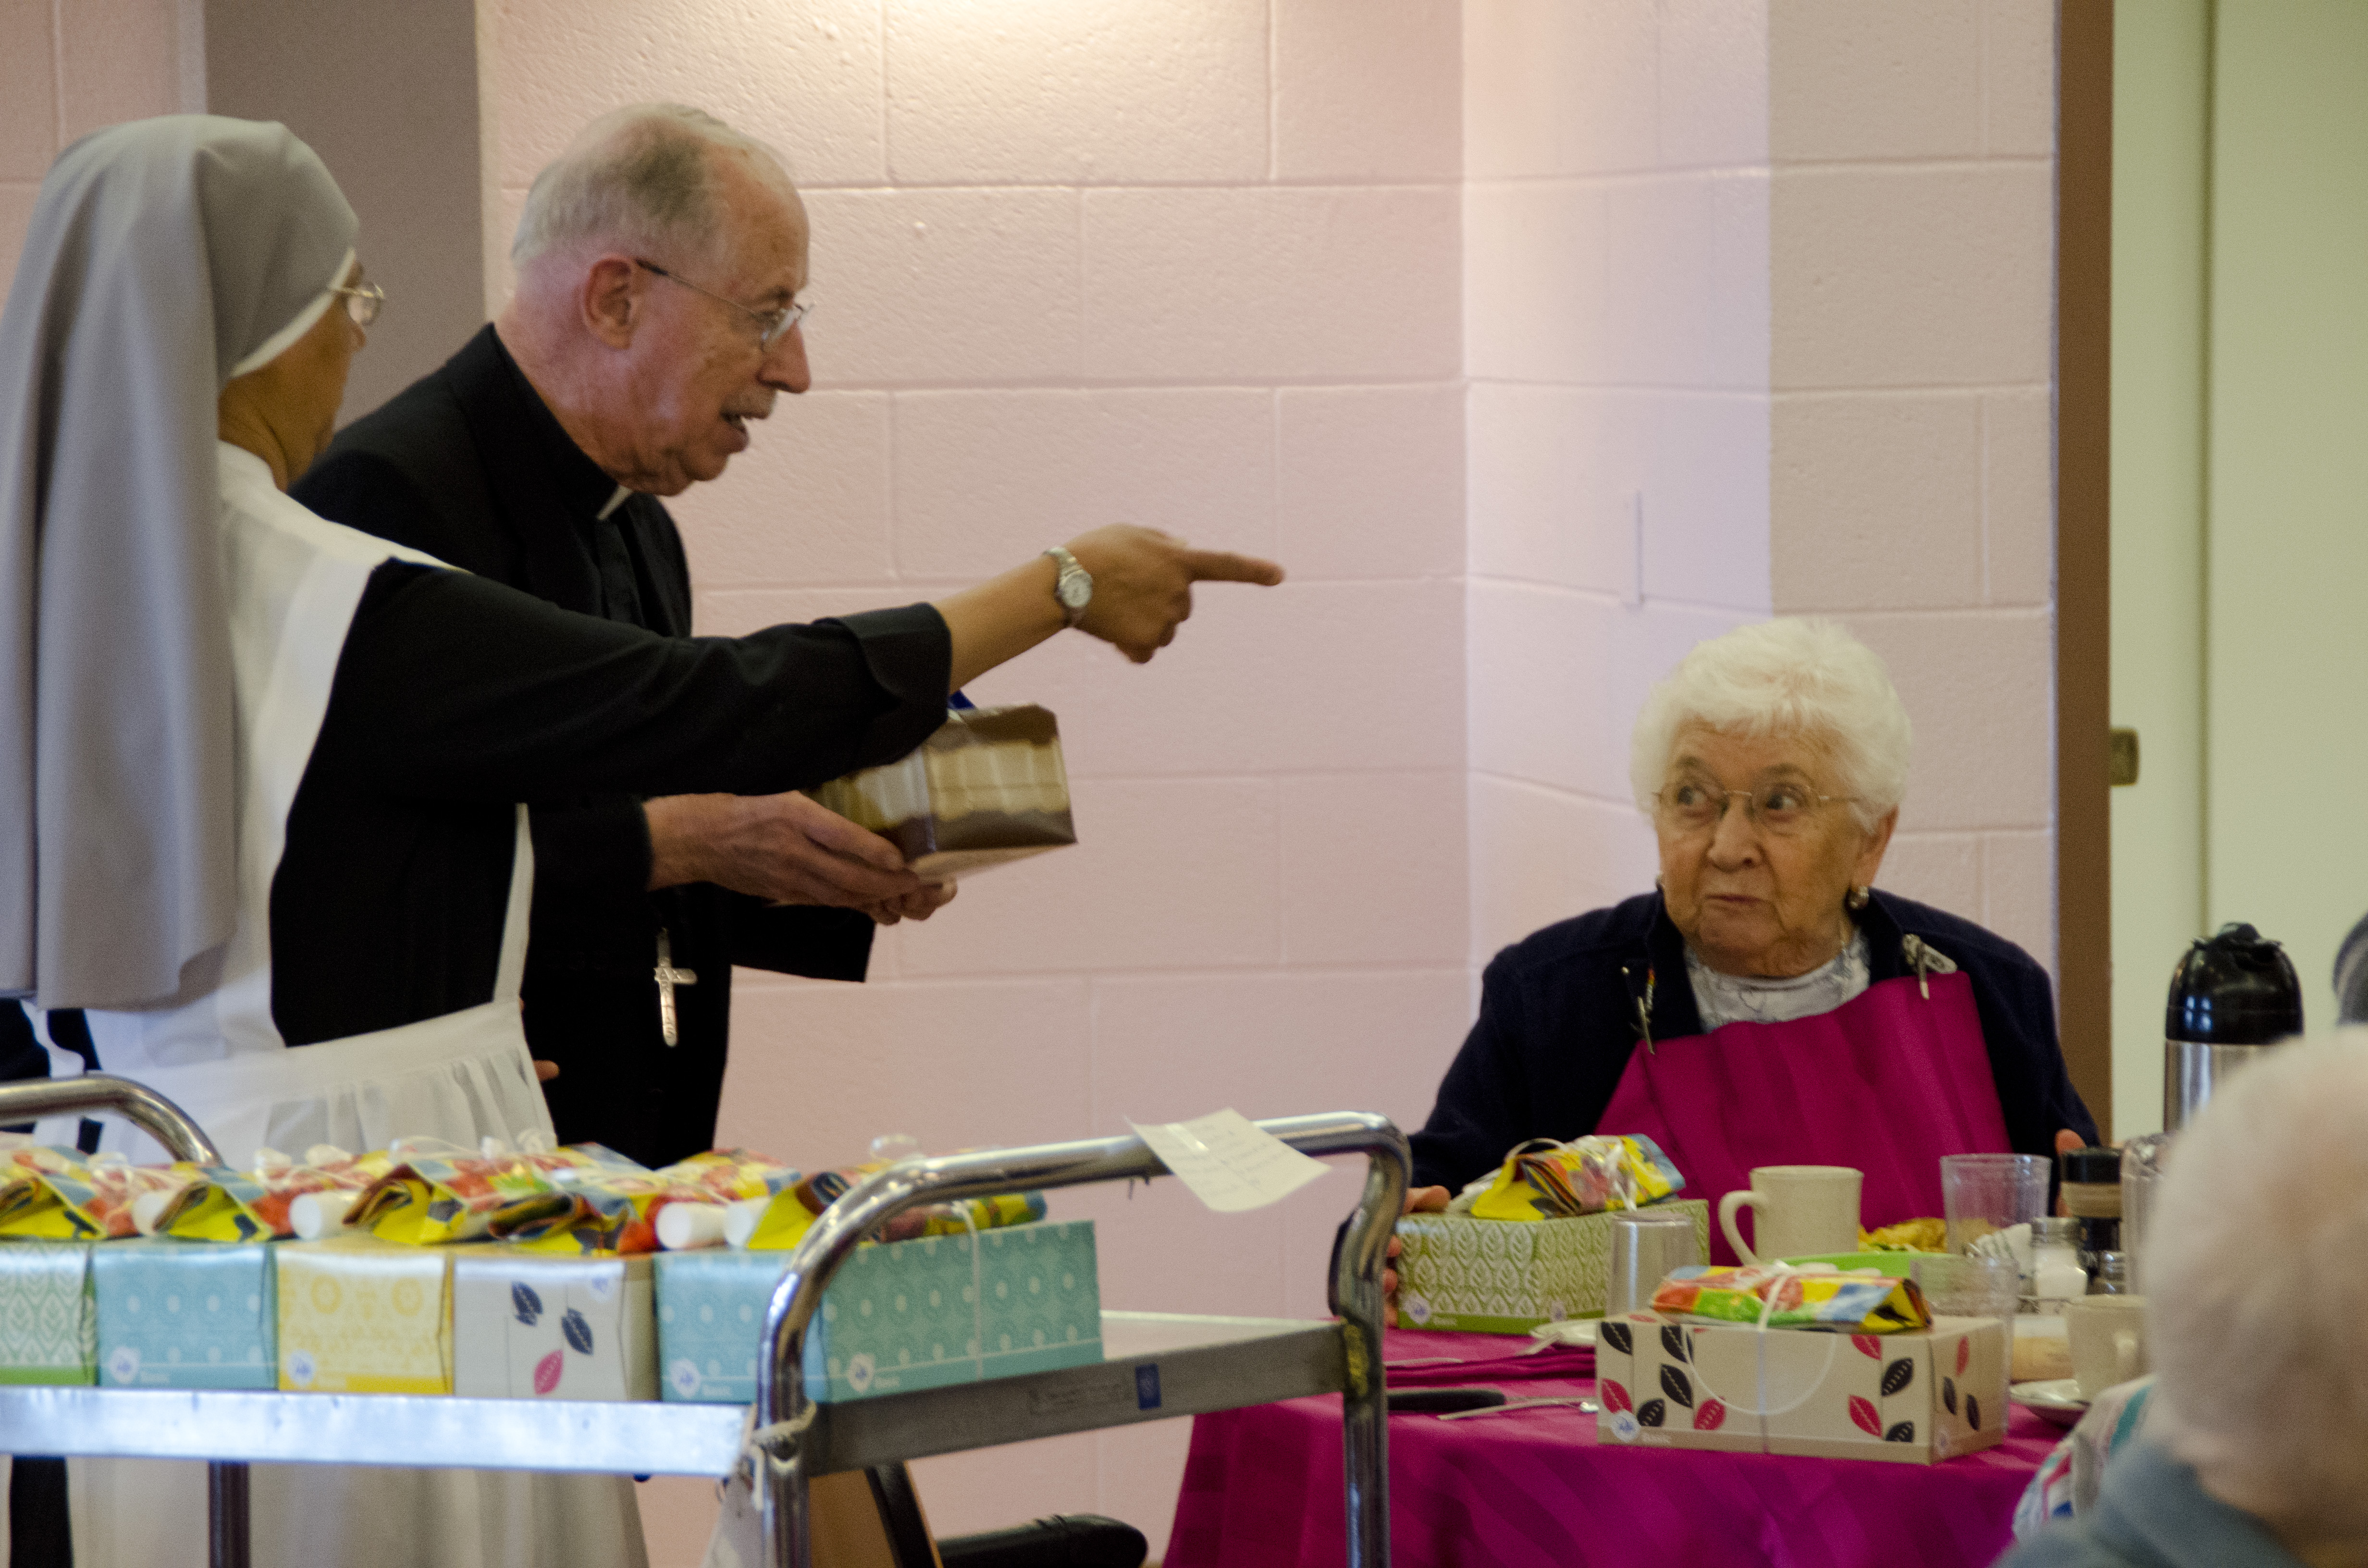 The sisters joined together with priests from the Diocese to distribute gifts and serve the noon meal to residents on the Feast of St. Joseph.